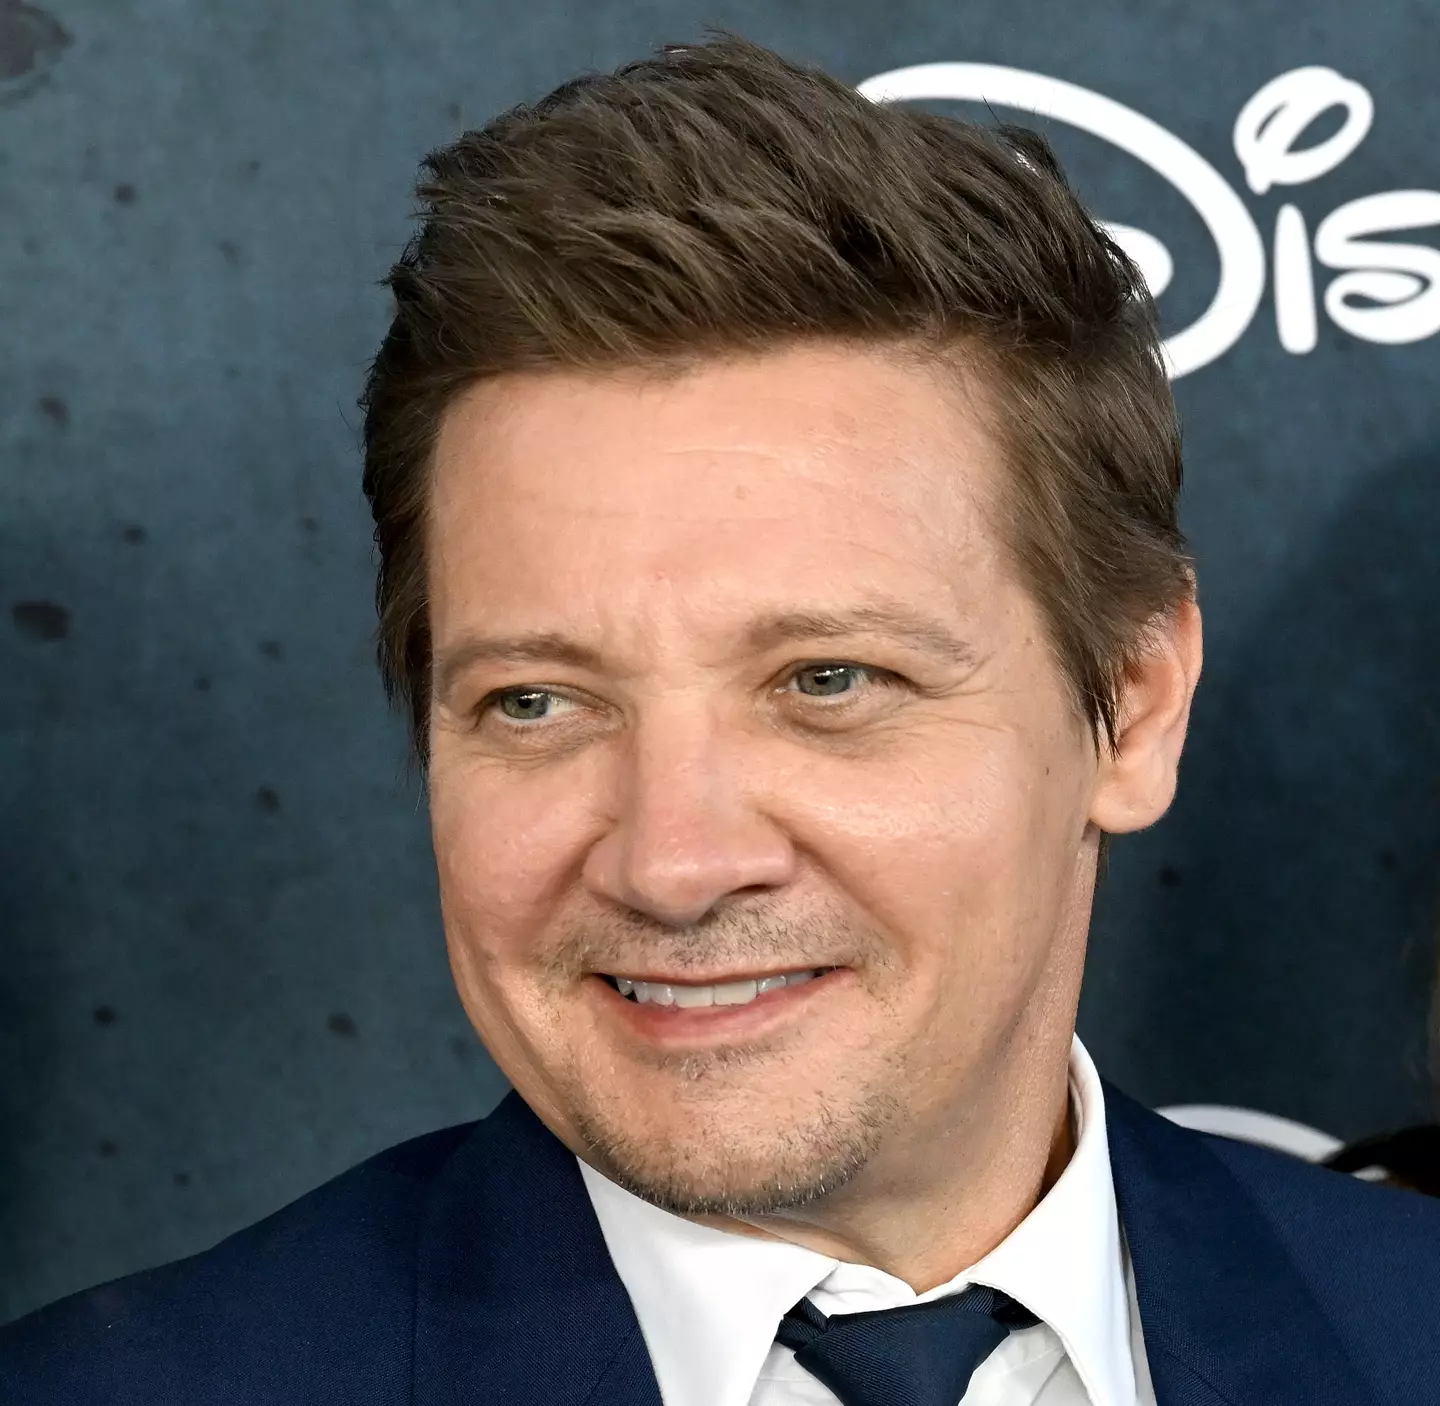 Renner is set to return to acting soon.